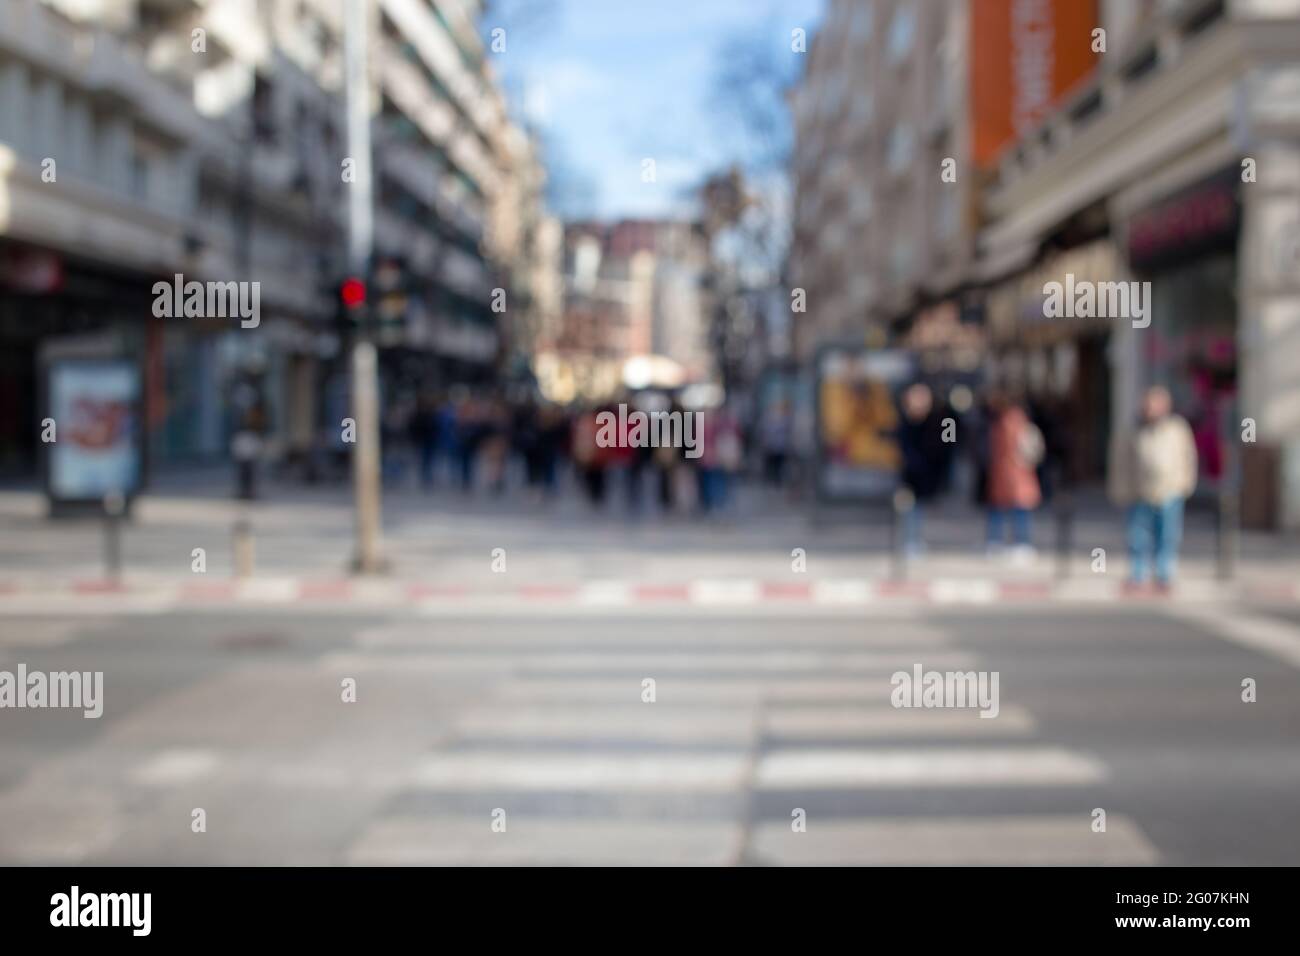 Blurred photo of a group of people walking in an urban area Stock Photo